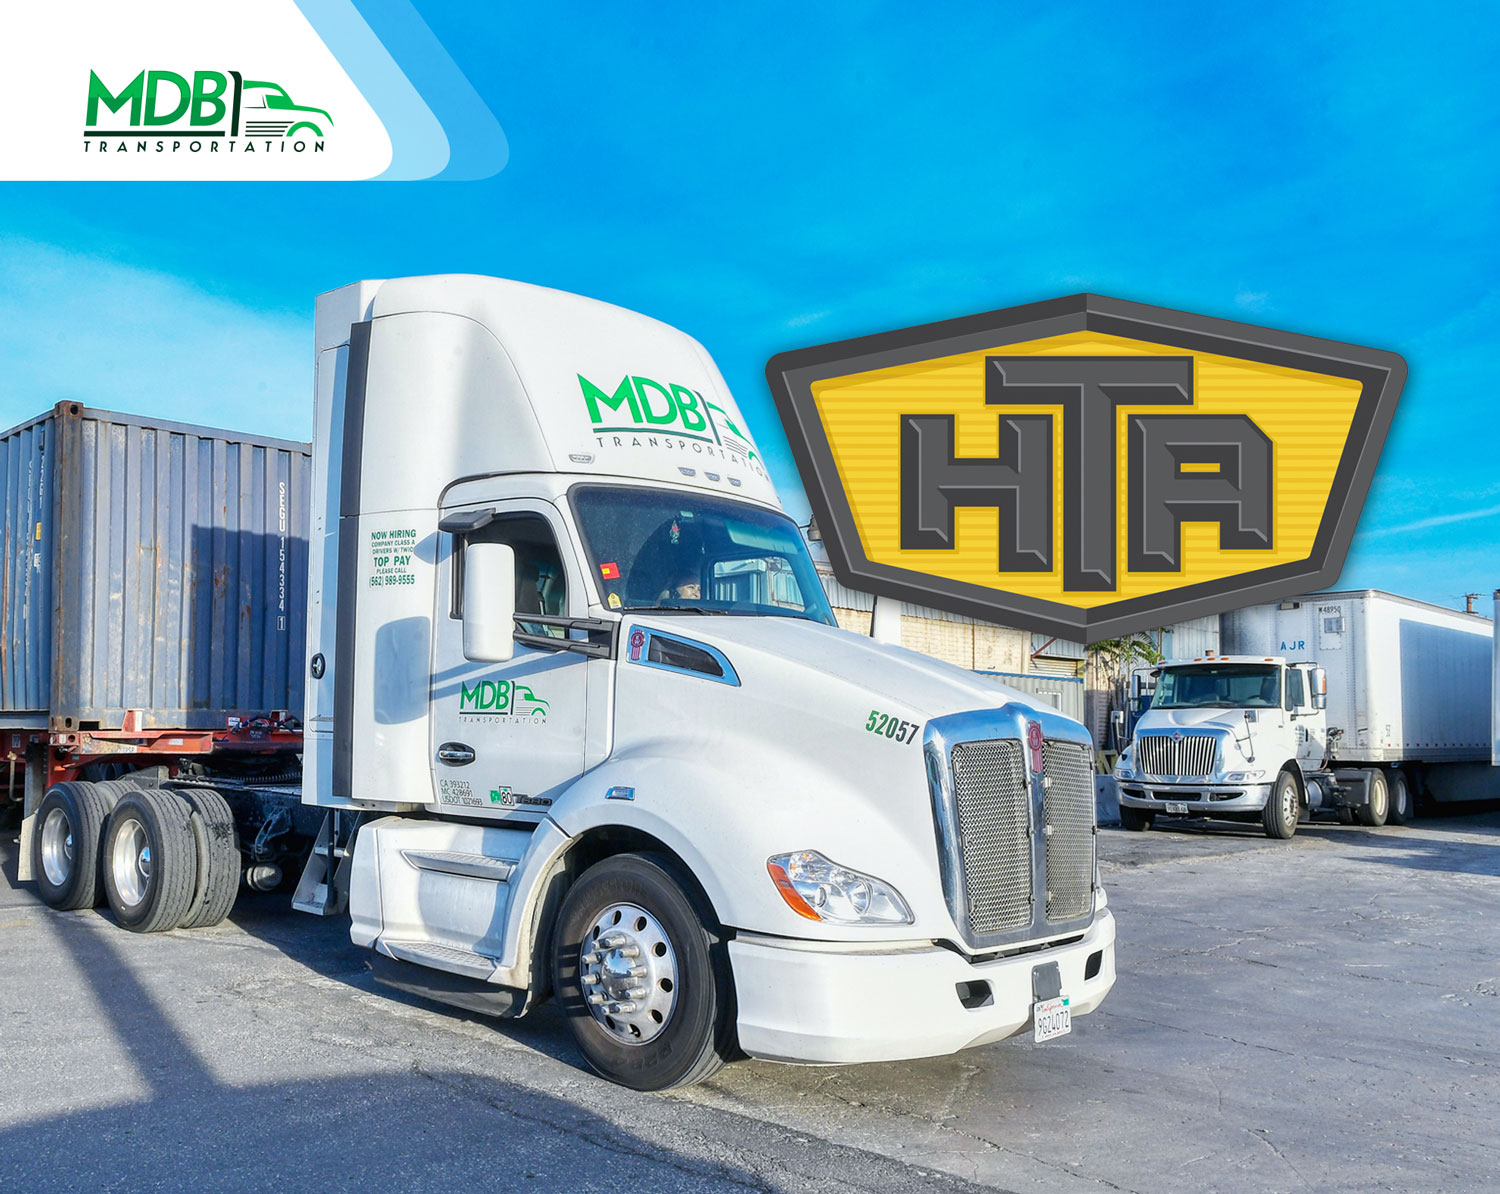 MDB Transportation Considered a First-Class Company by Harbor Trucking Association